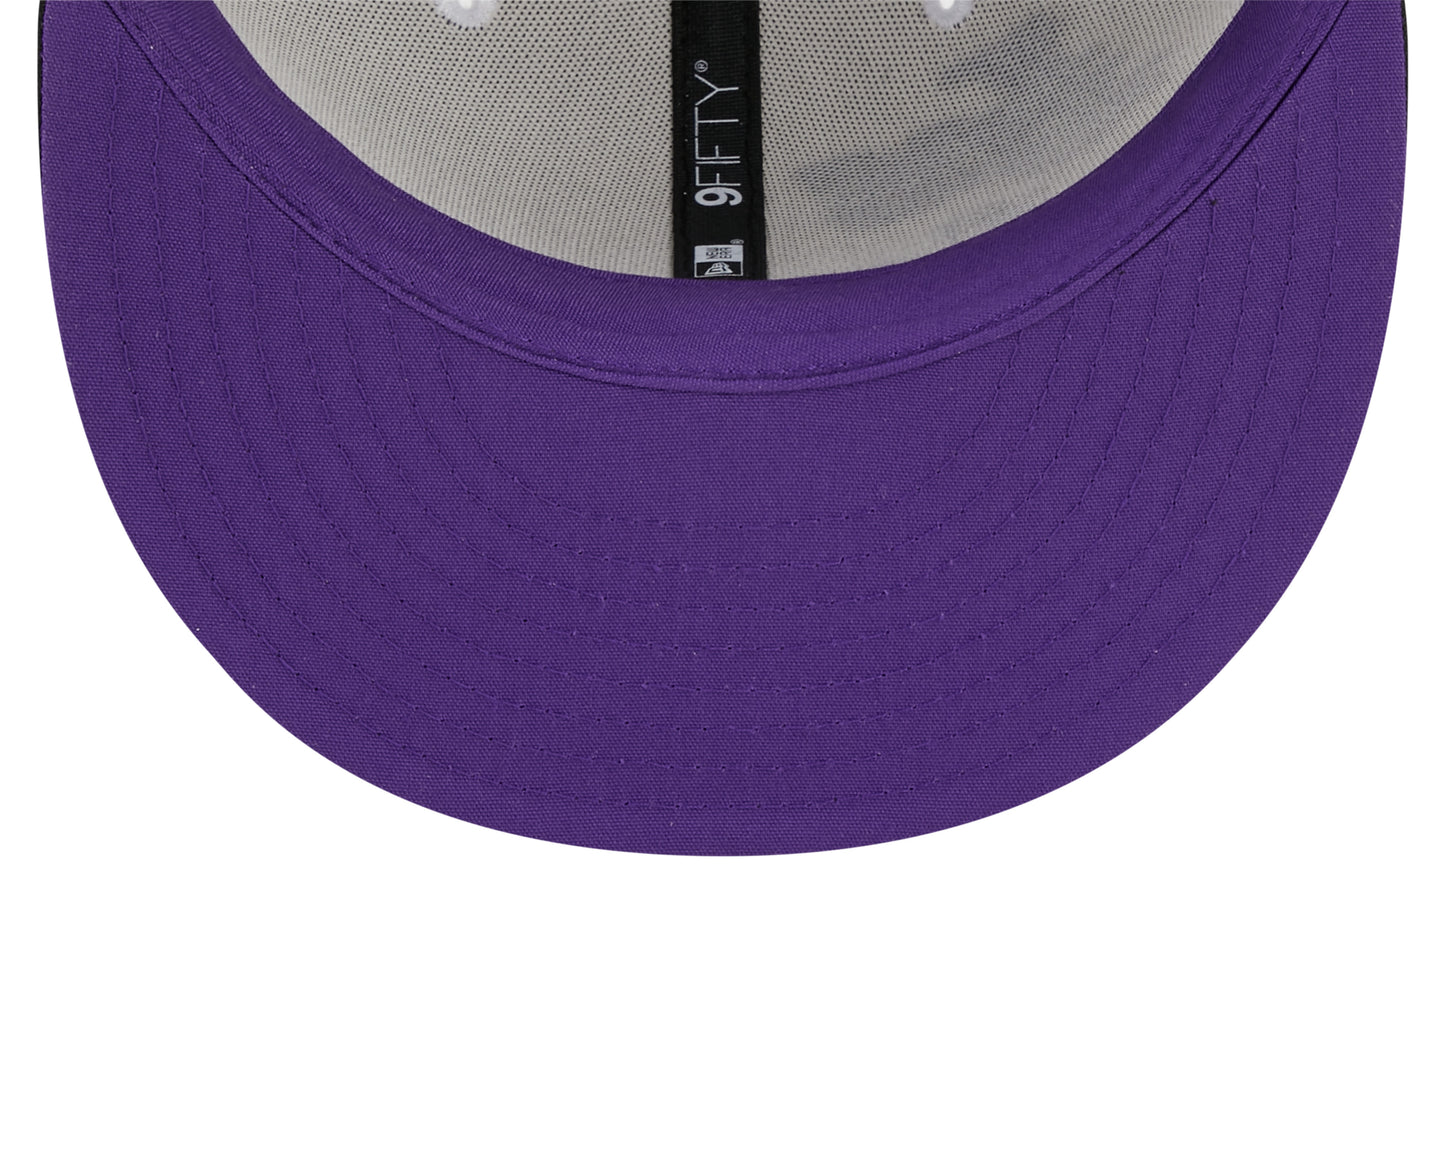 Los Angeles Lakers New Era City Edition 9FIFTY Snap Back Hat - White/Purple